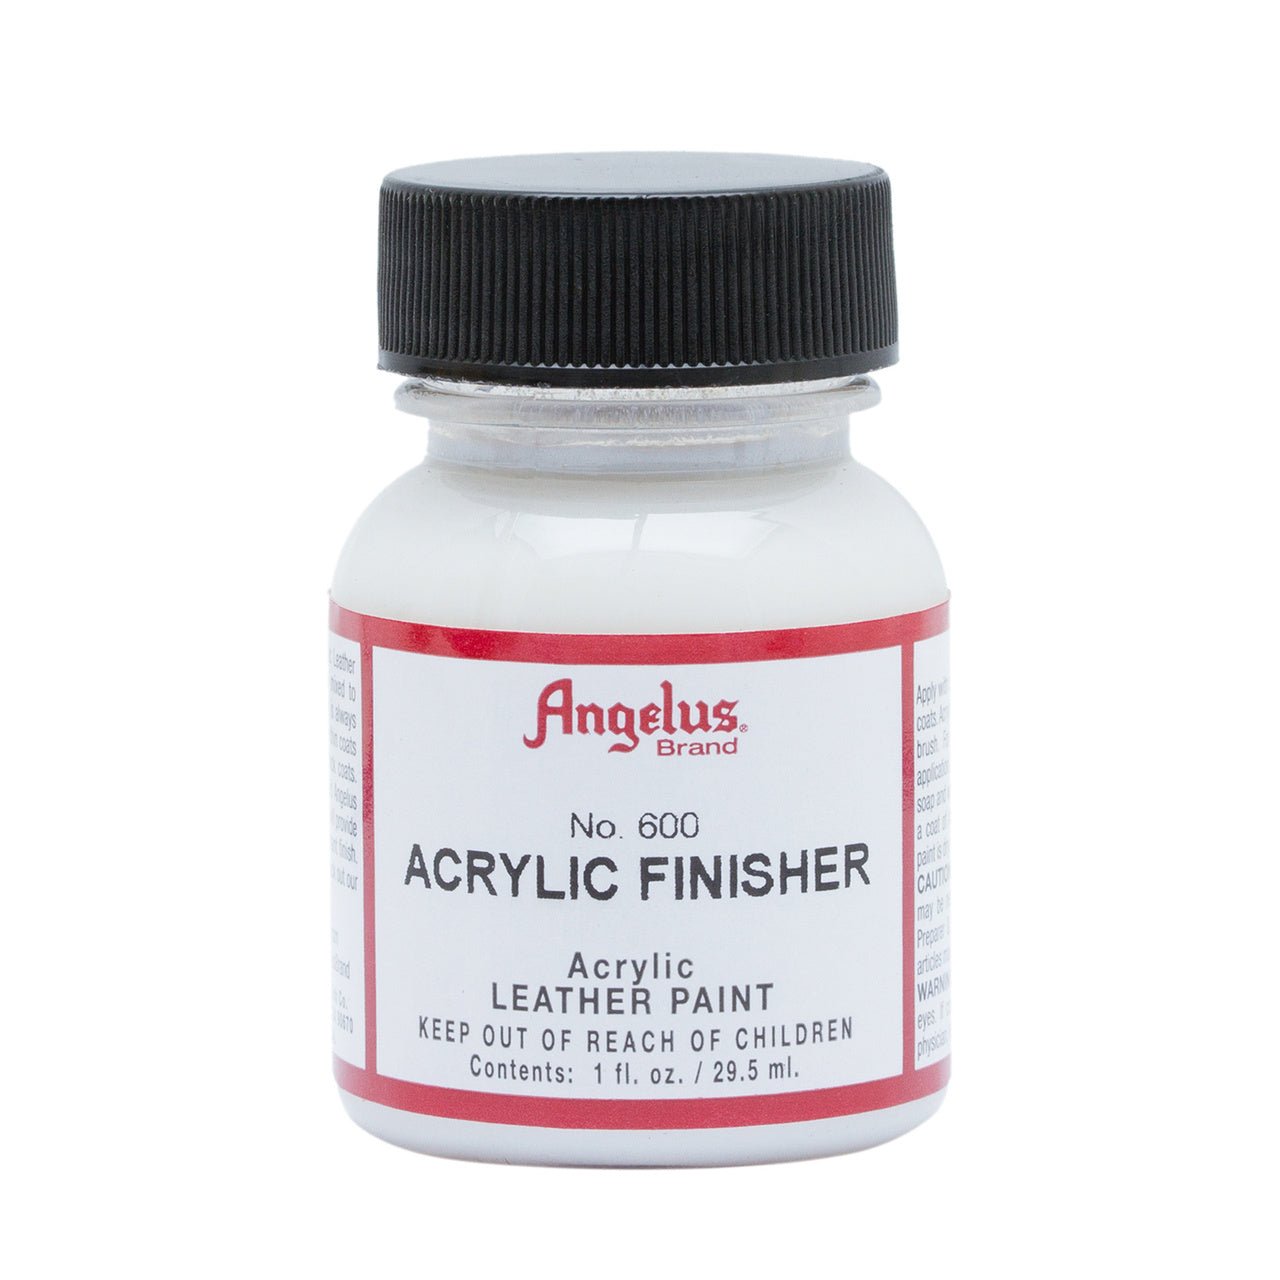 Angelus Acrylic Leather Finisher - 1 oz. Bottle - No. 600 Normal - merriartist.com